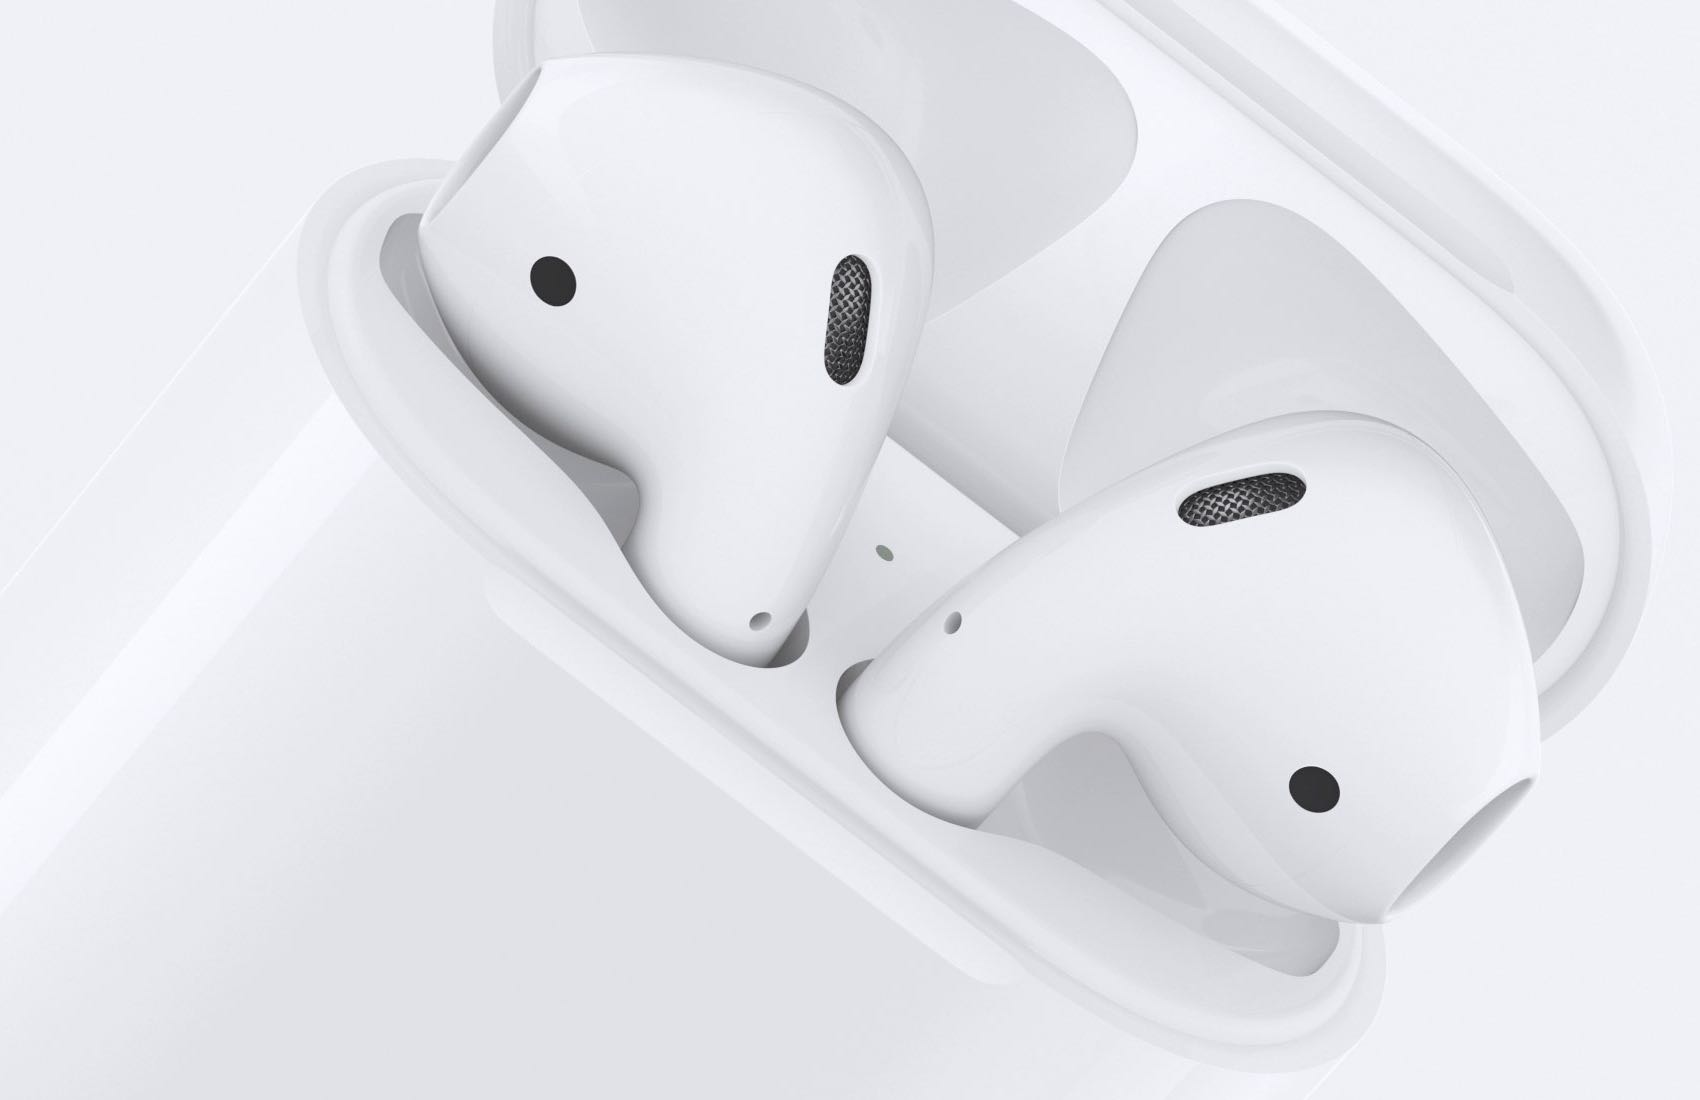 Mass production of third-gen AirPods will begin in the first half of